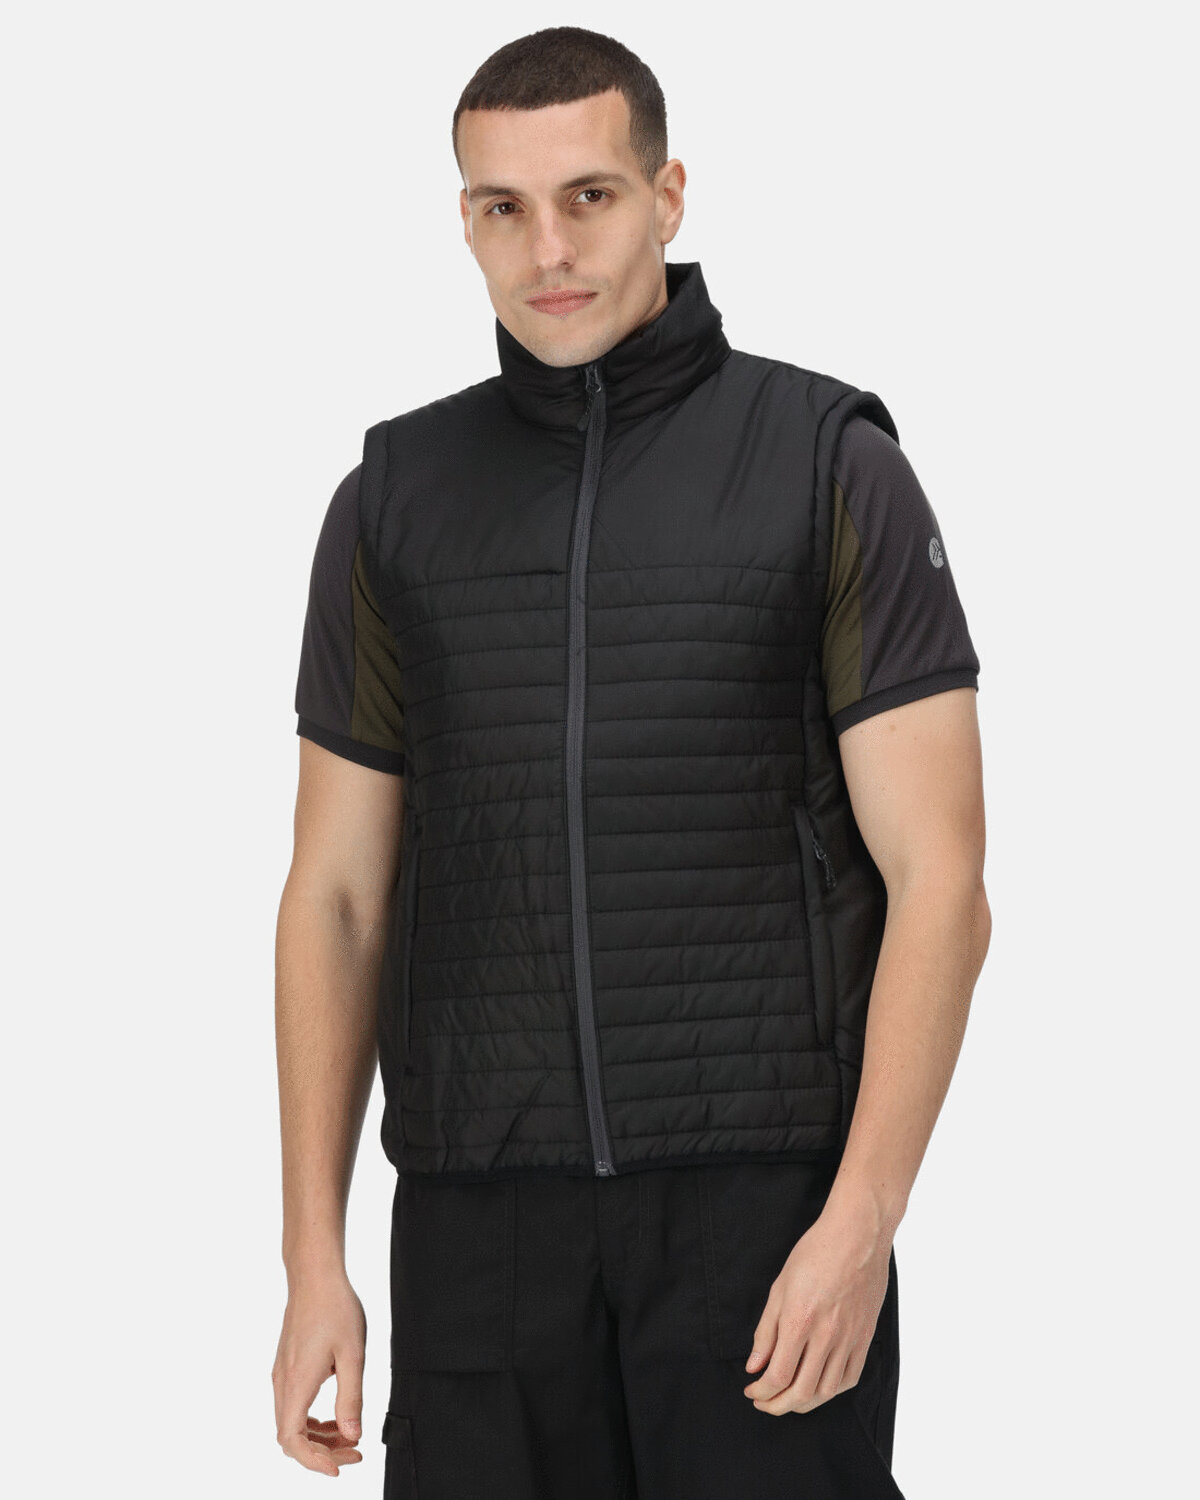 HONESTLY MADE 100% RECYCLED INSULATED BODYWARMER